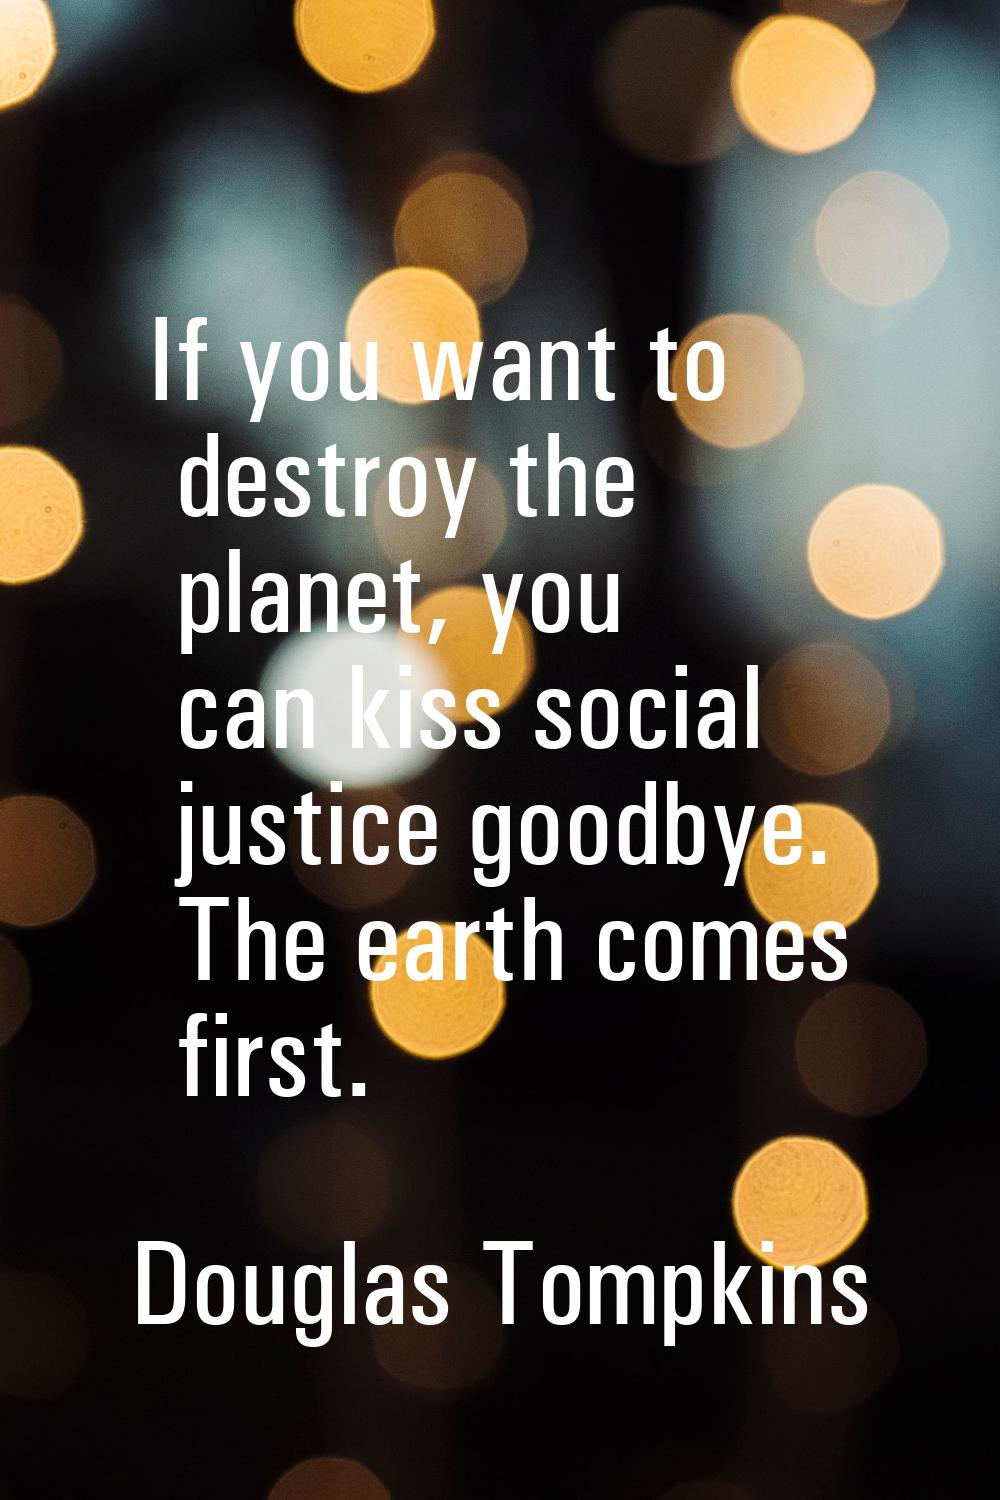 If you want to destroy the planet, you can kiss social justice goodbye. The earth comes first.